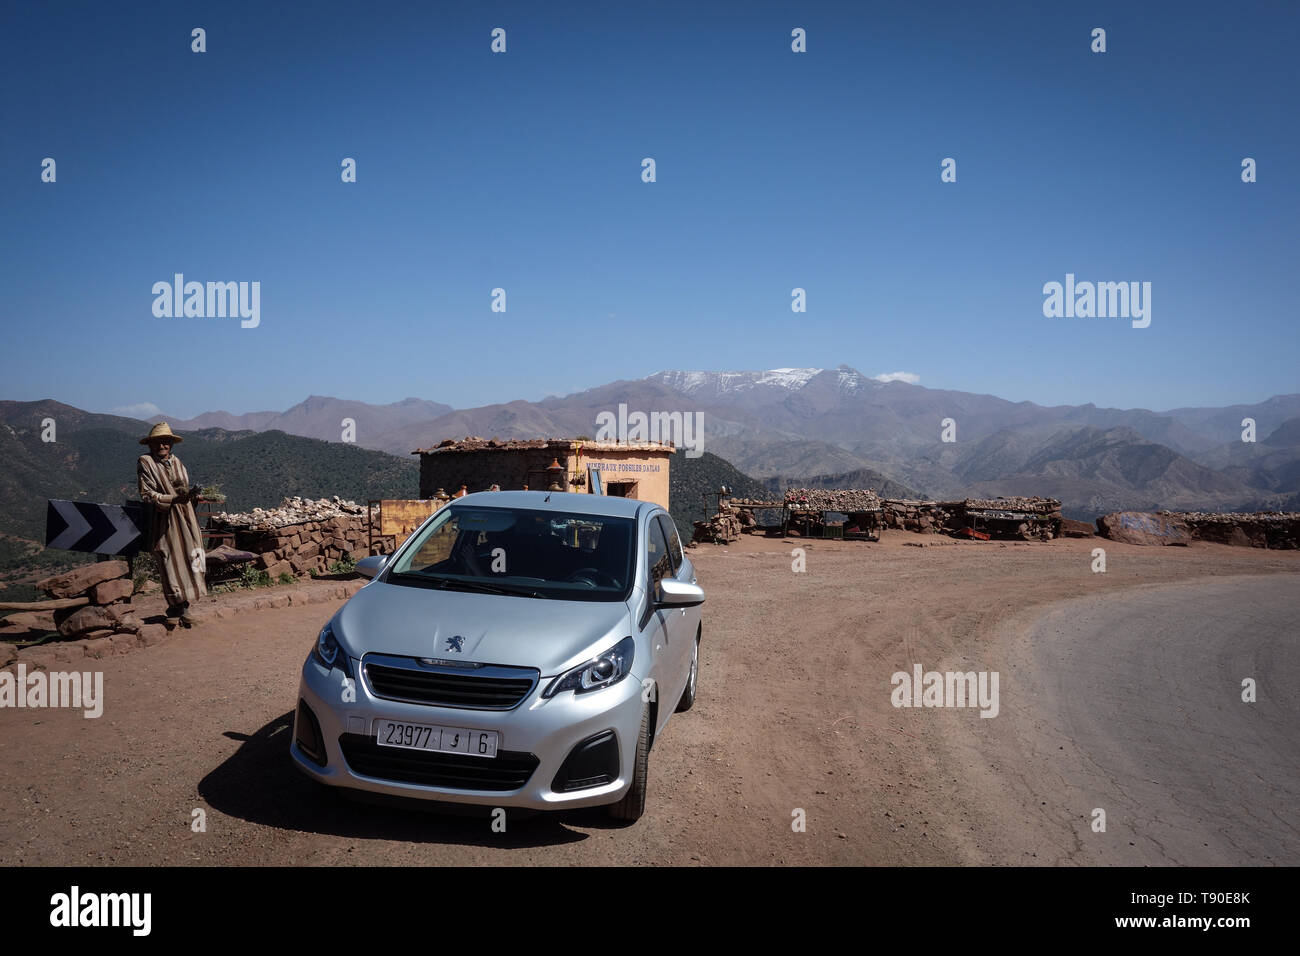 Aguelmouss, Morocco - March 19th, 2019: High Atlas Mountains outlook with a Maroccan selling some herbs and a compact car Stock Photo